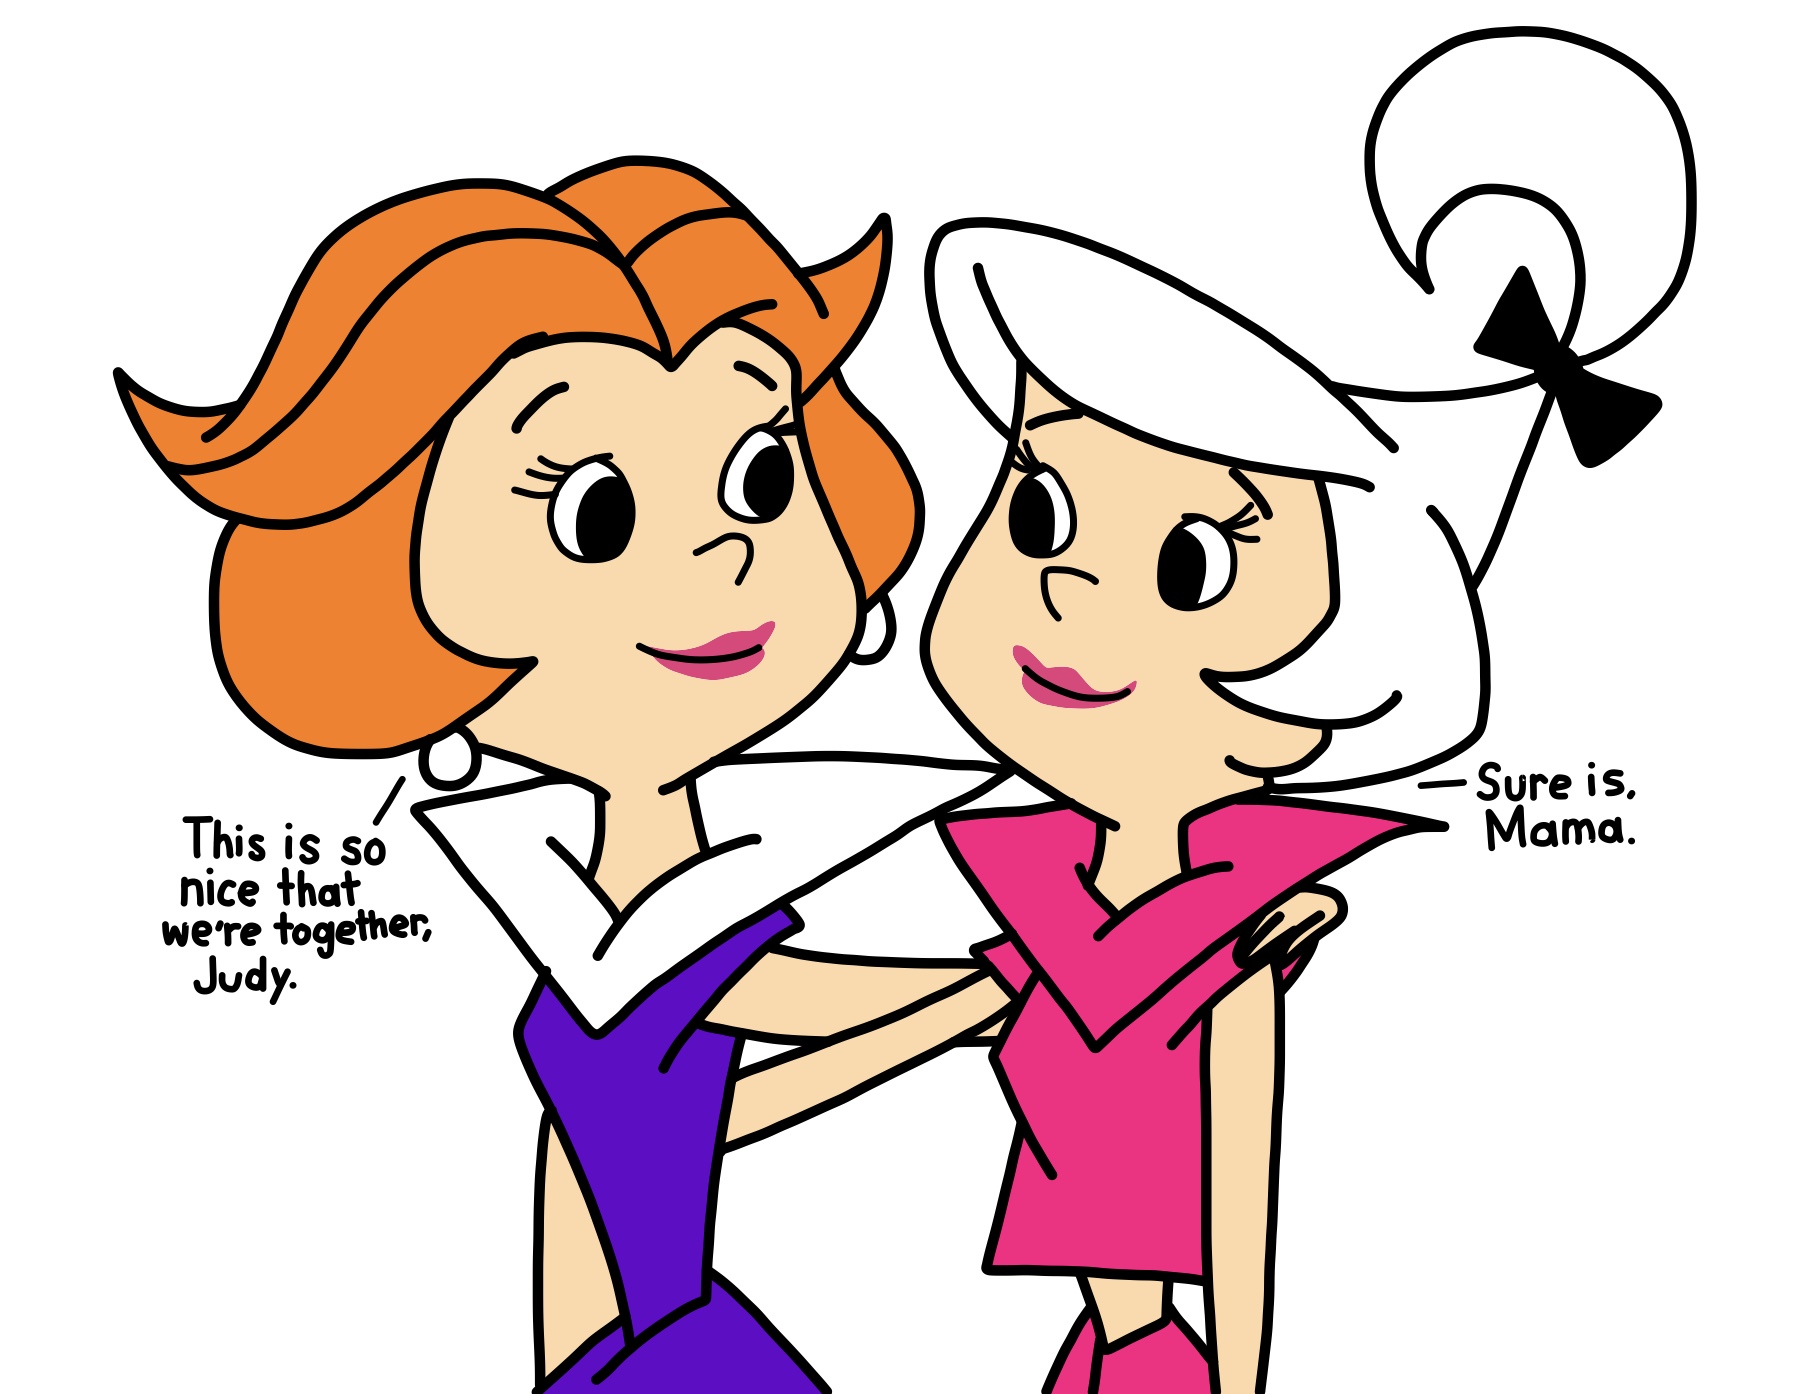 Jane And Judy Jetson Together By Thomascarr0806 On Deviantart 